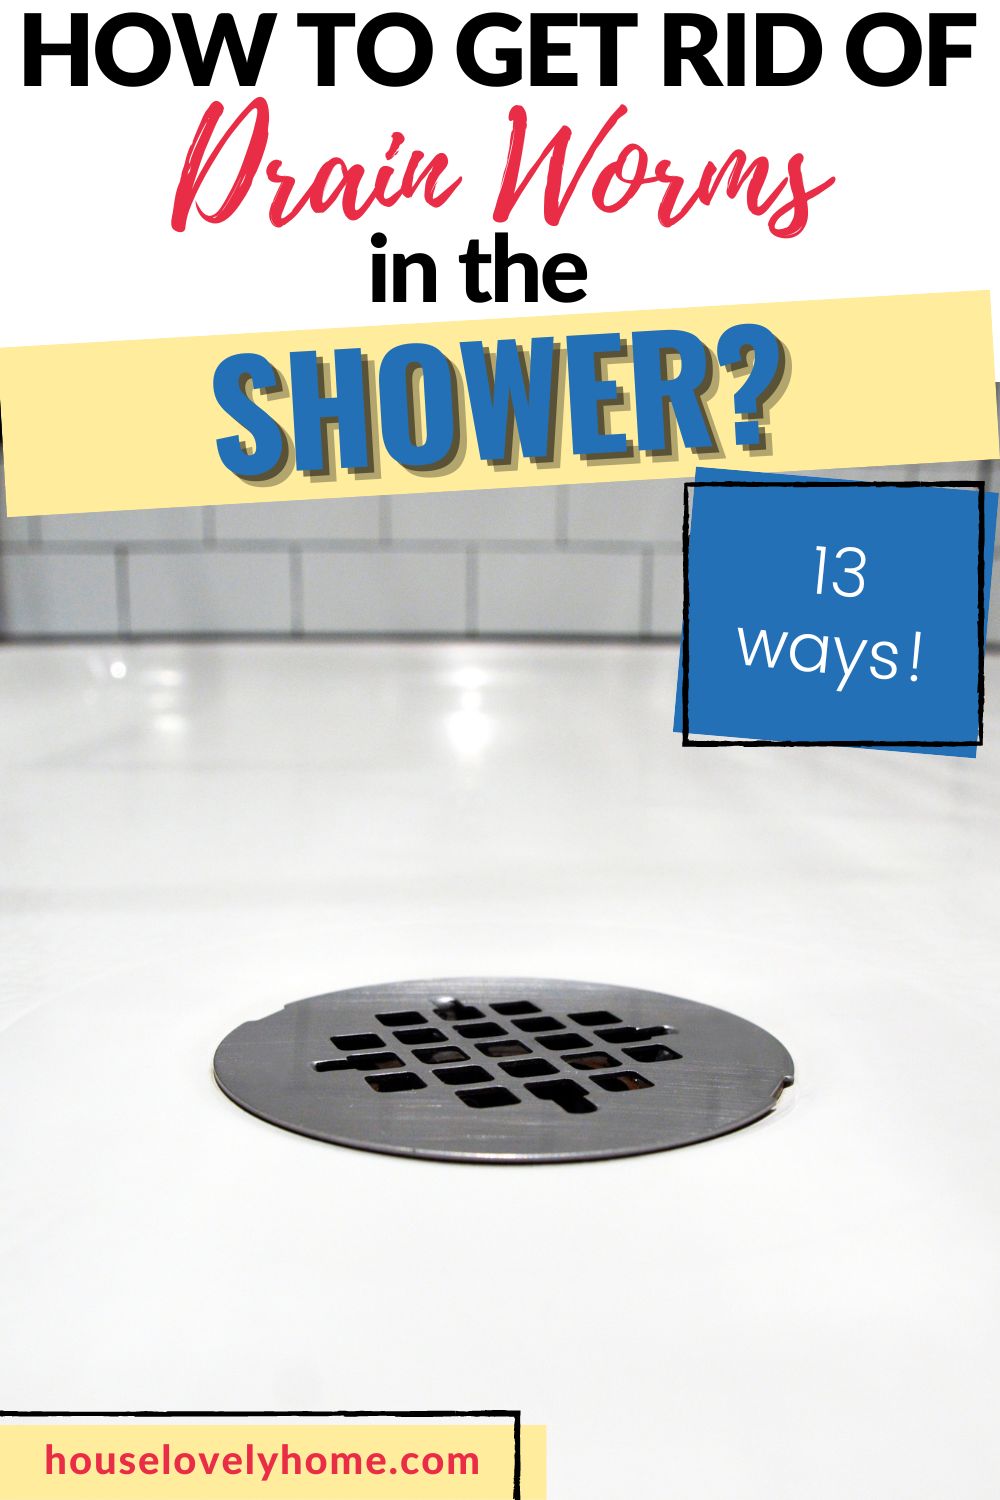 picture of shower drain with text overlay that reads How to get rid of drain worms in the shower